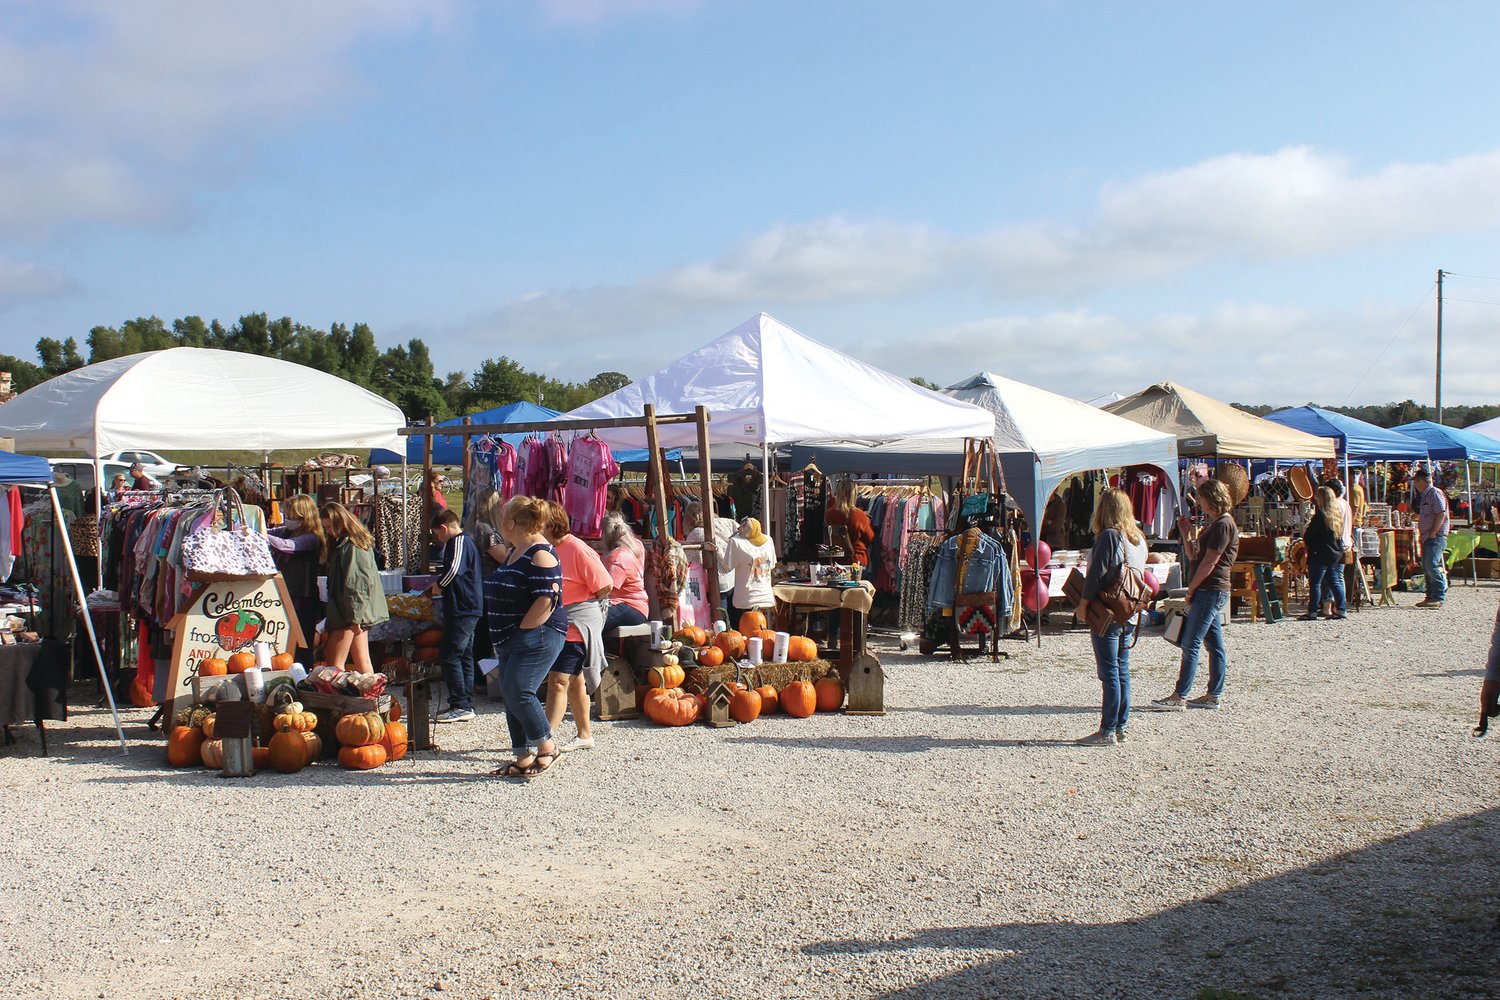 Approximately 1,200 shoppers visited last weekend’s Junk Fest at E. Marie’s Antique Mall & Boutique.